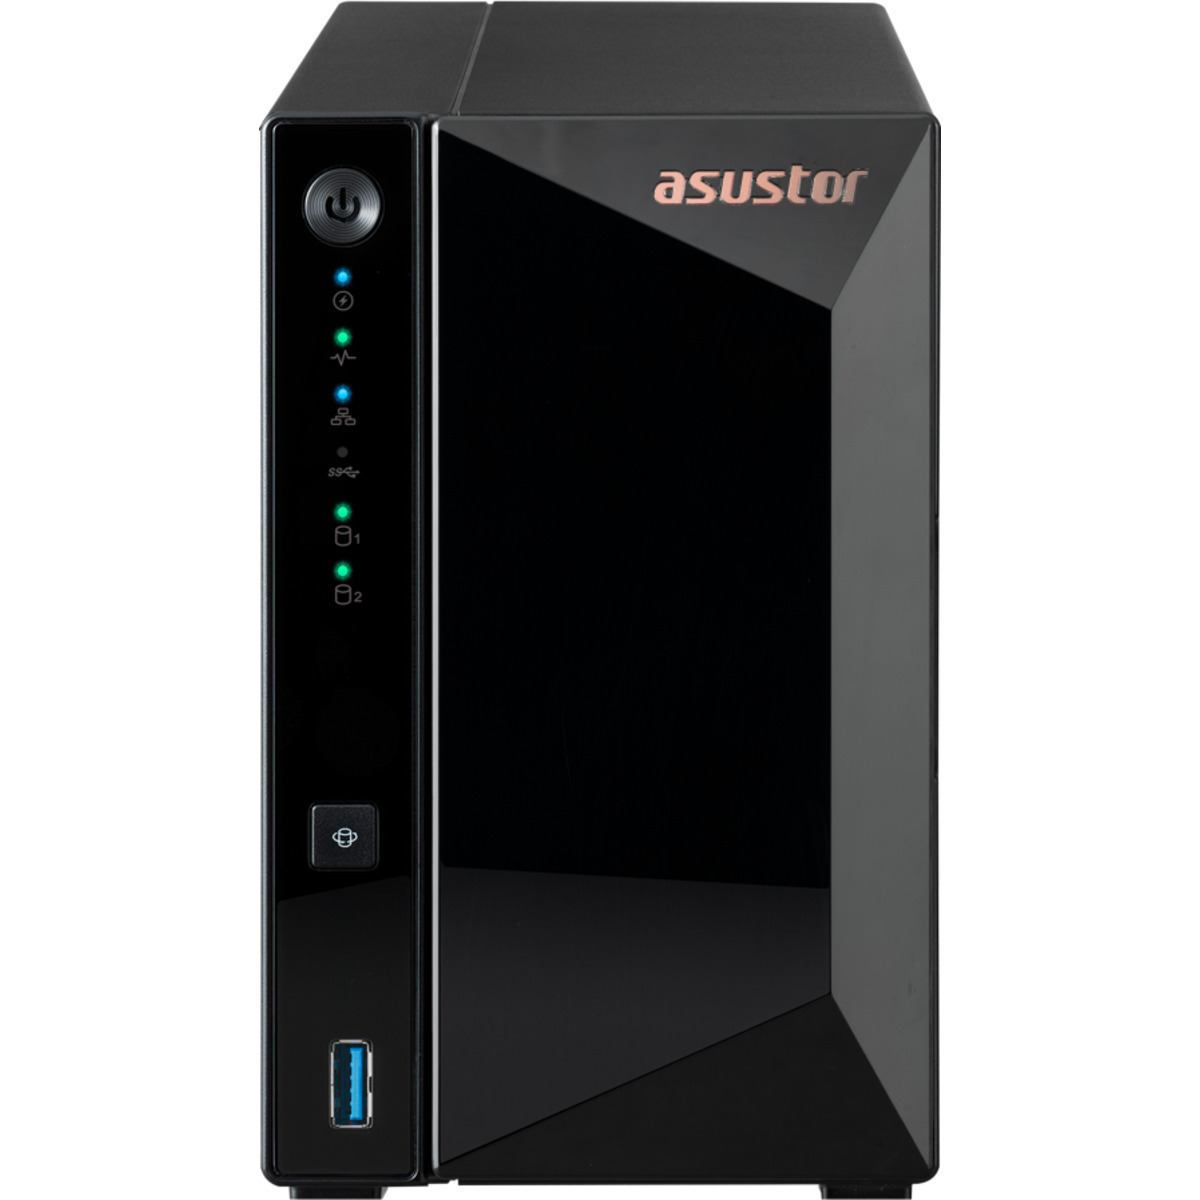 ASUSTOR DRIVESTOR 2 Pro Gen2 AS3302T v2 4tb 2-Bay Desktop Personal / Basic Home / Small Office NAS - Network Attached Storage Device 2x2tb Sandisk Ultra 3D SDSSDH3-2T00 2.5 560/520MB/s SATA 6Gb/s SSD CONSUMER Class Drives Installed - Burn-In Tested - ON SALE DRIVESTOR 2 Pro Gen2 AS3302T v2